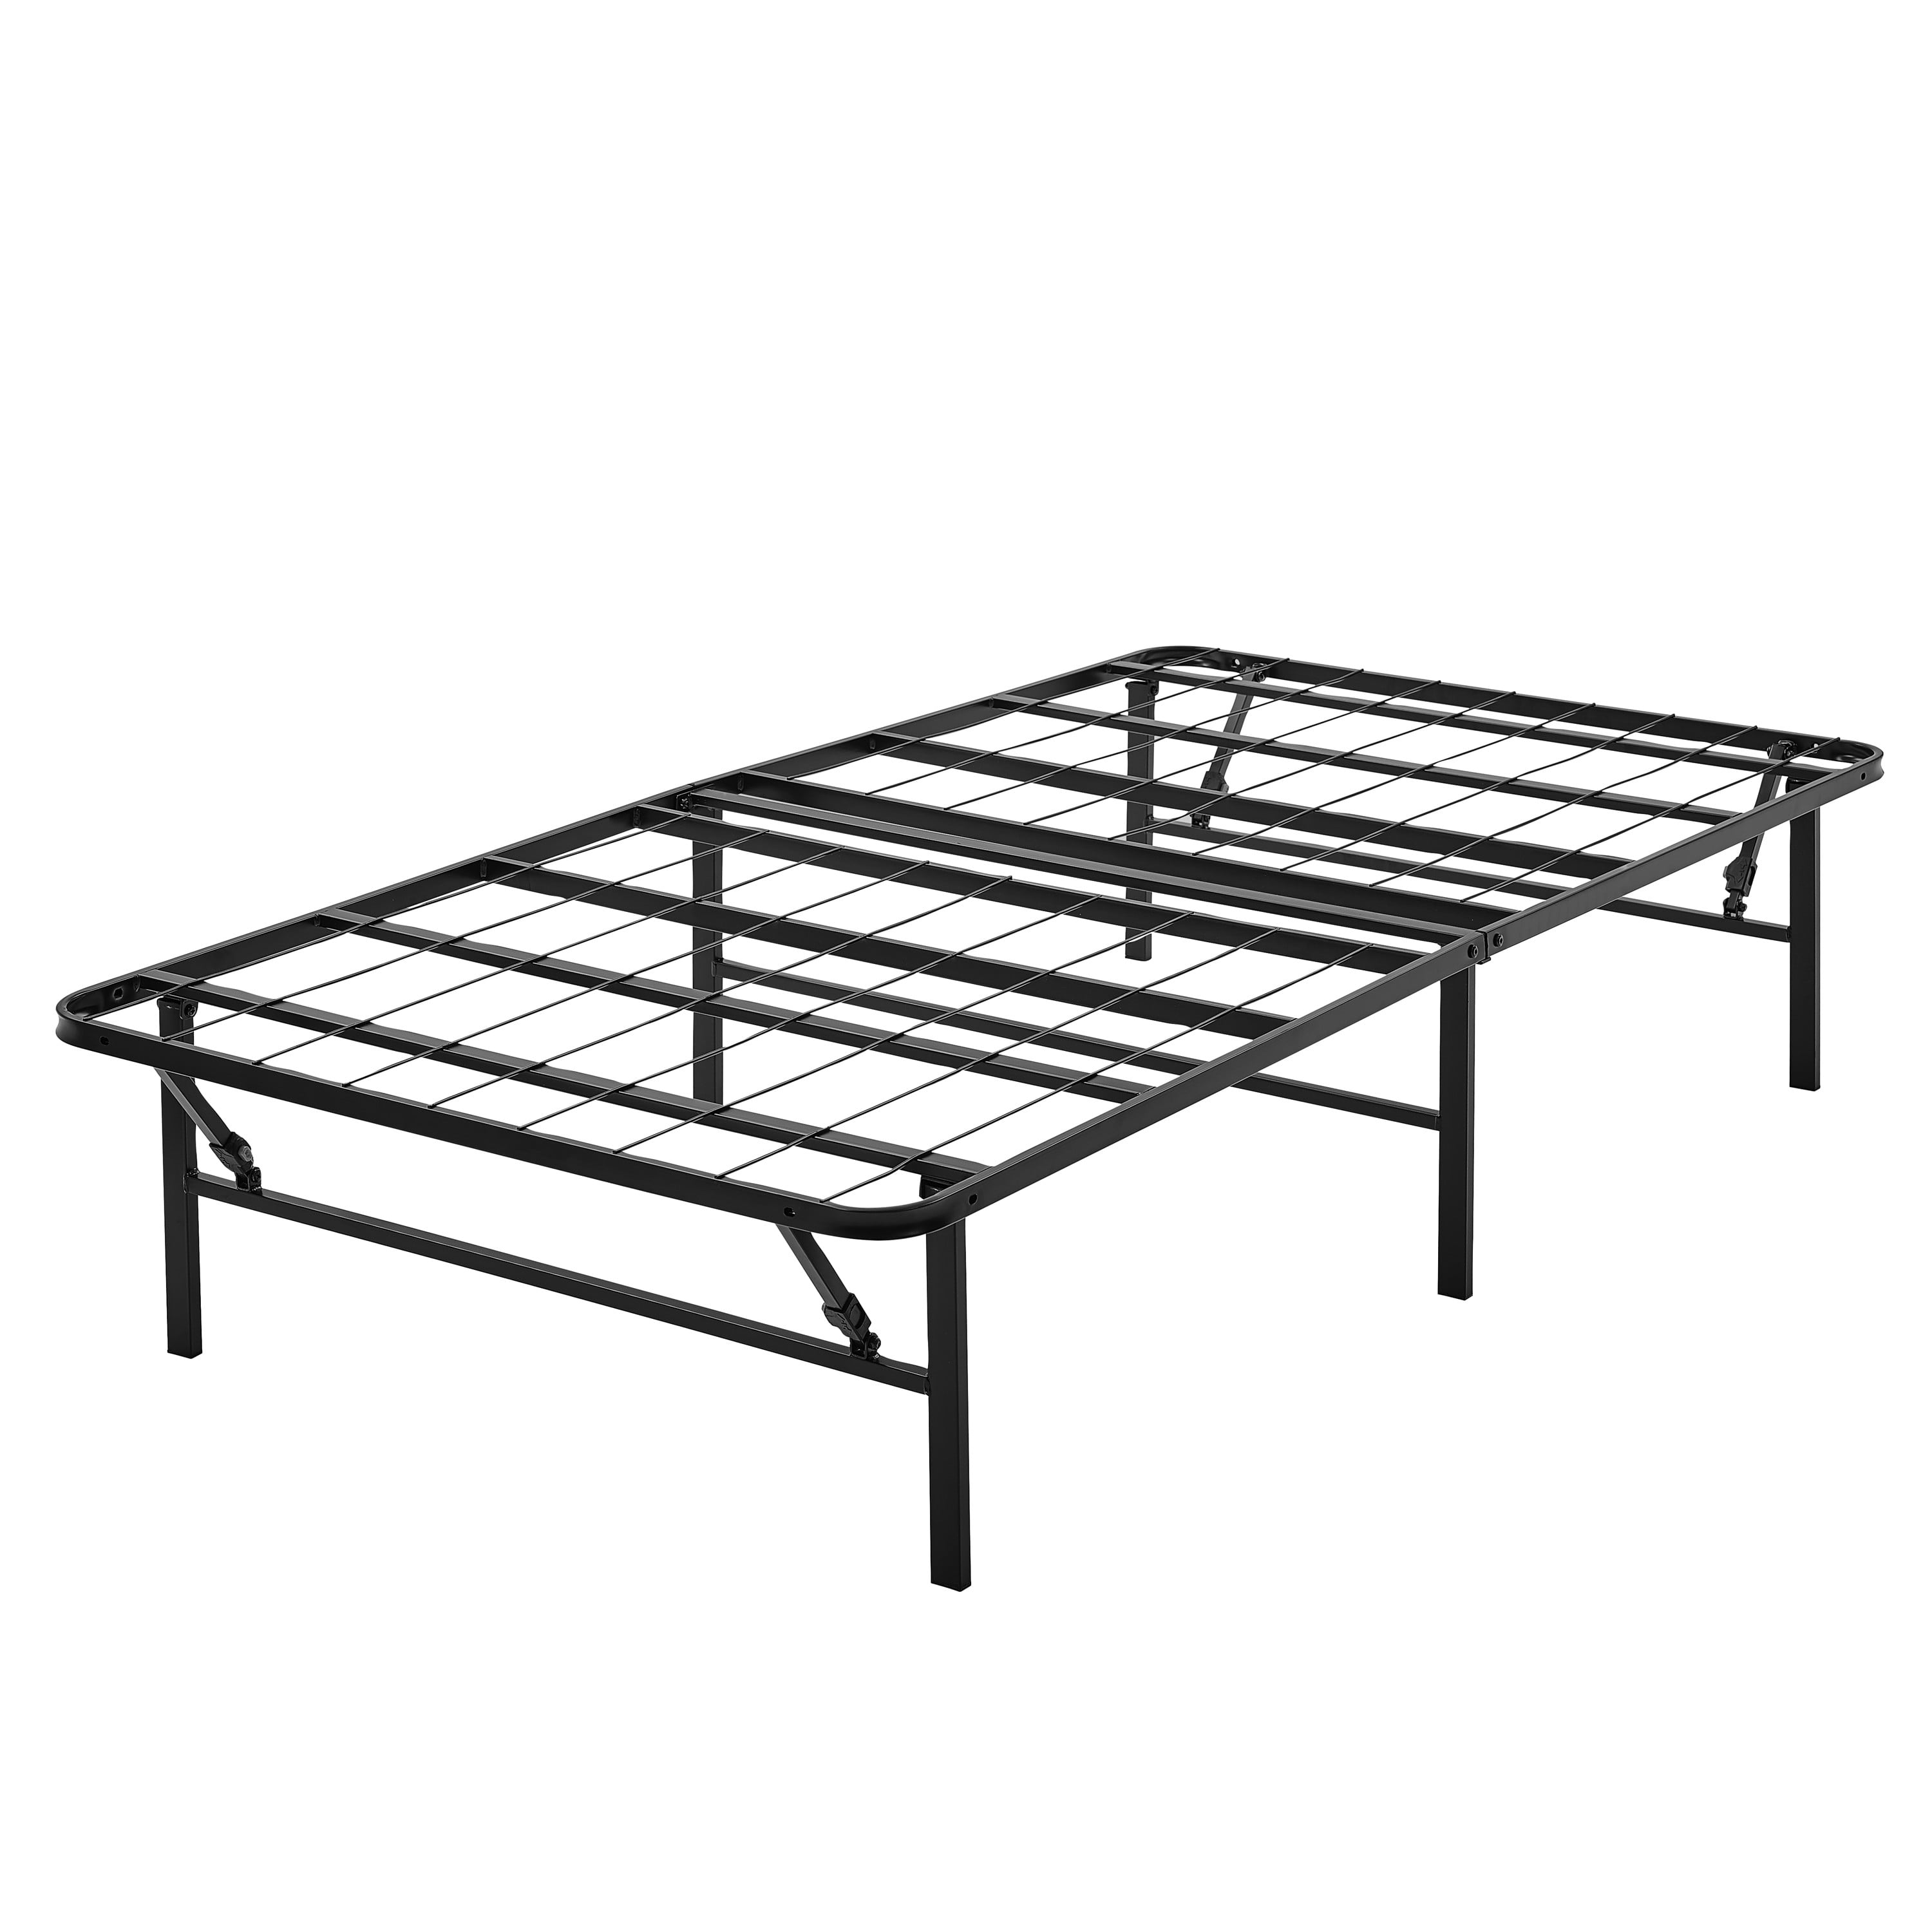 Mainstays 14 High Profile Foldable Steel Bed Frame Powder Coated